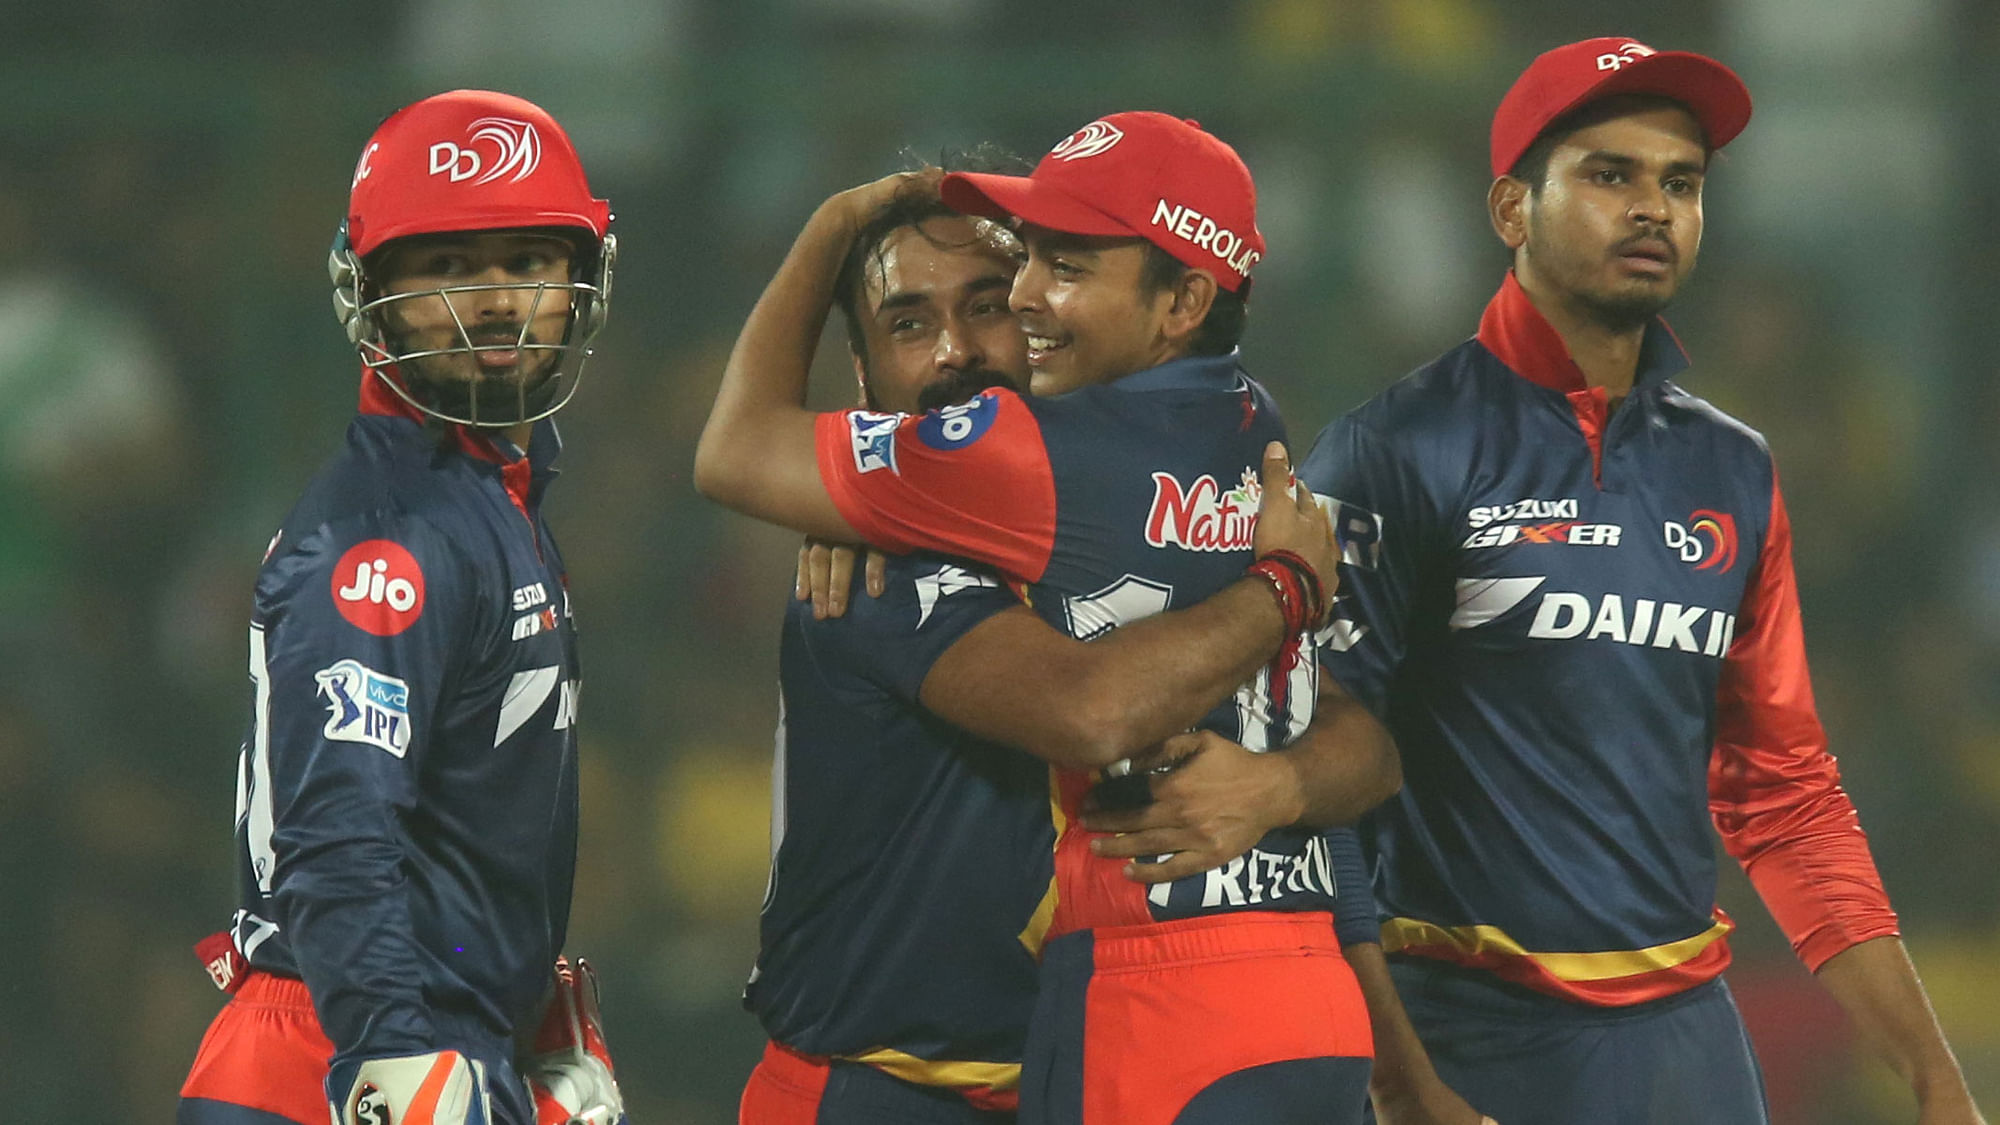 Amit Mishra celebrates a wicket with his teammates.